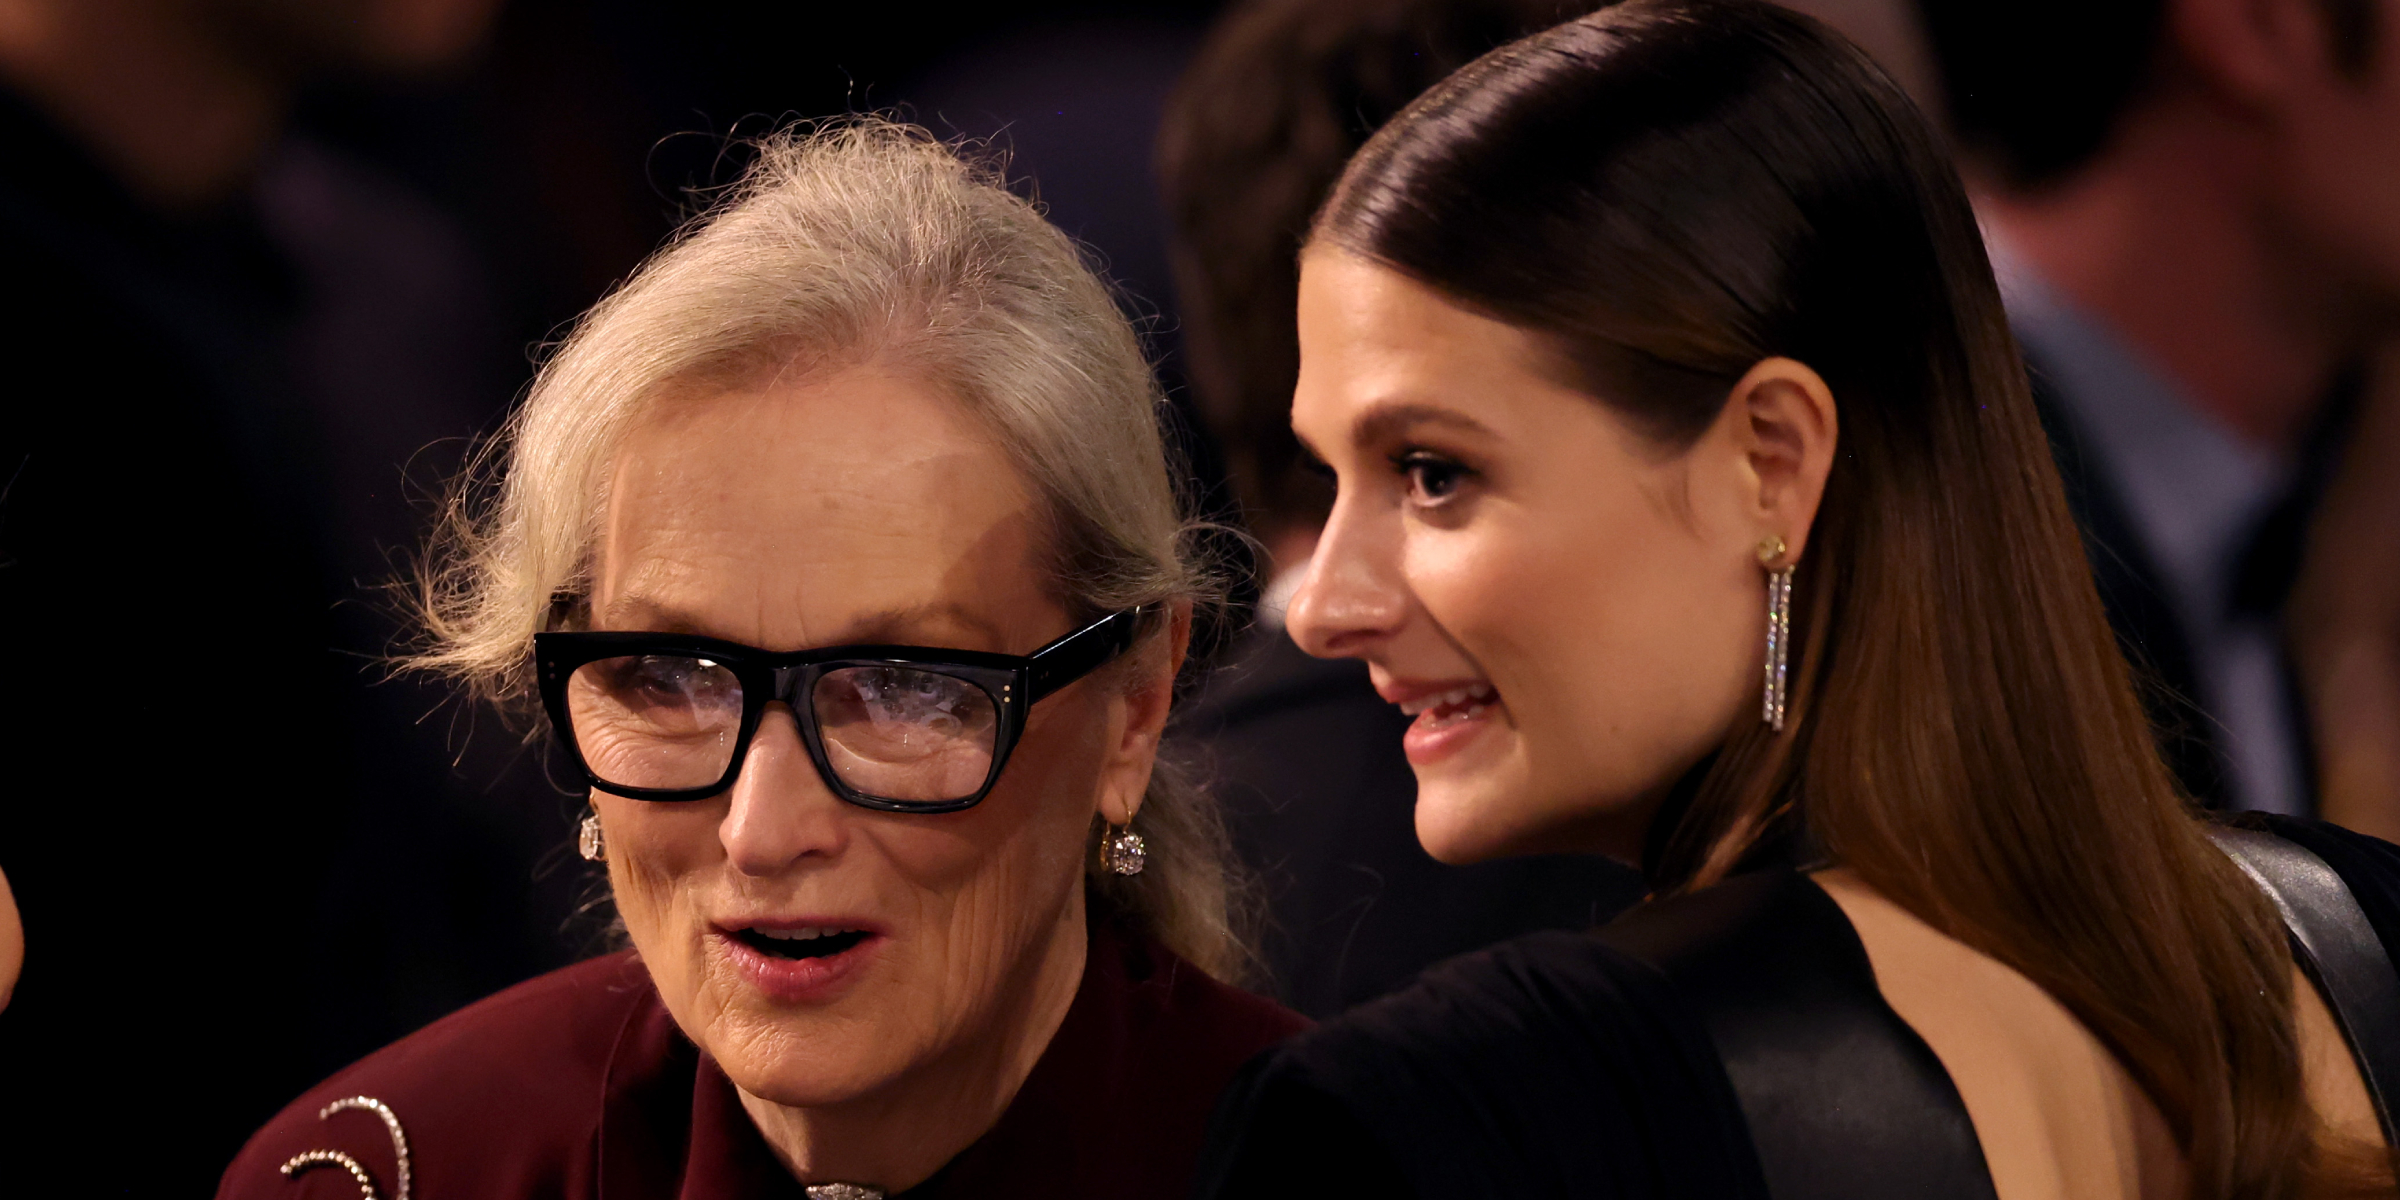 Meryl Streep and Louisa Jacobson | Source: Getty Images